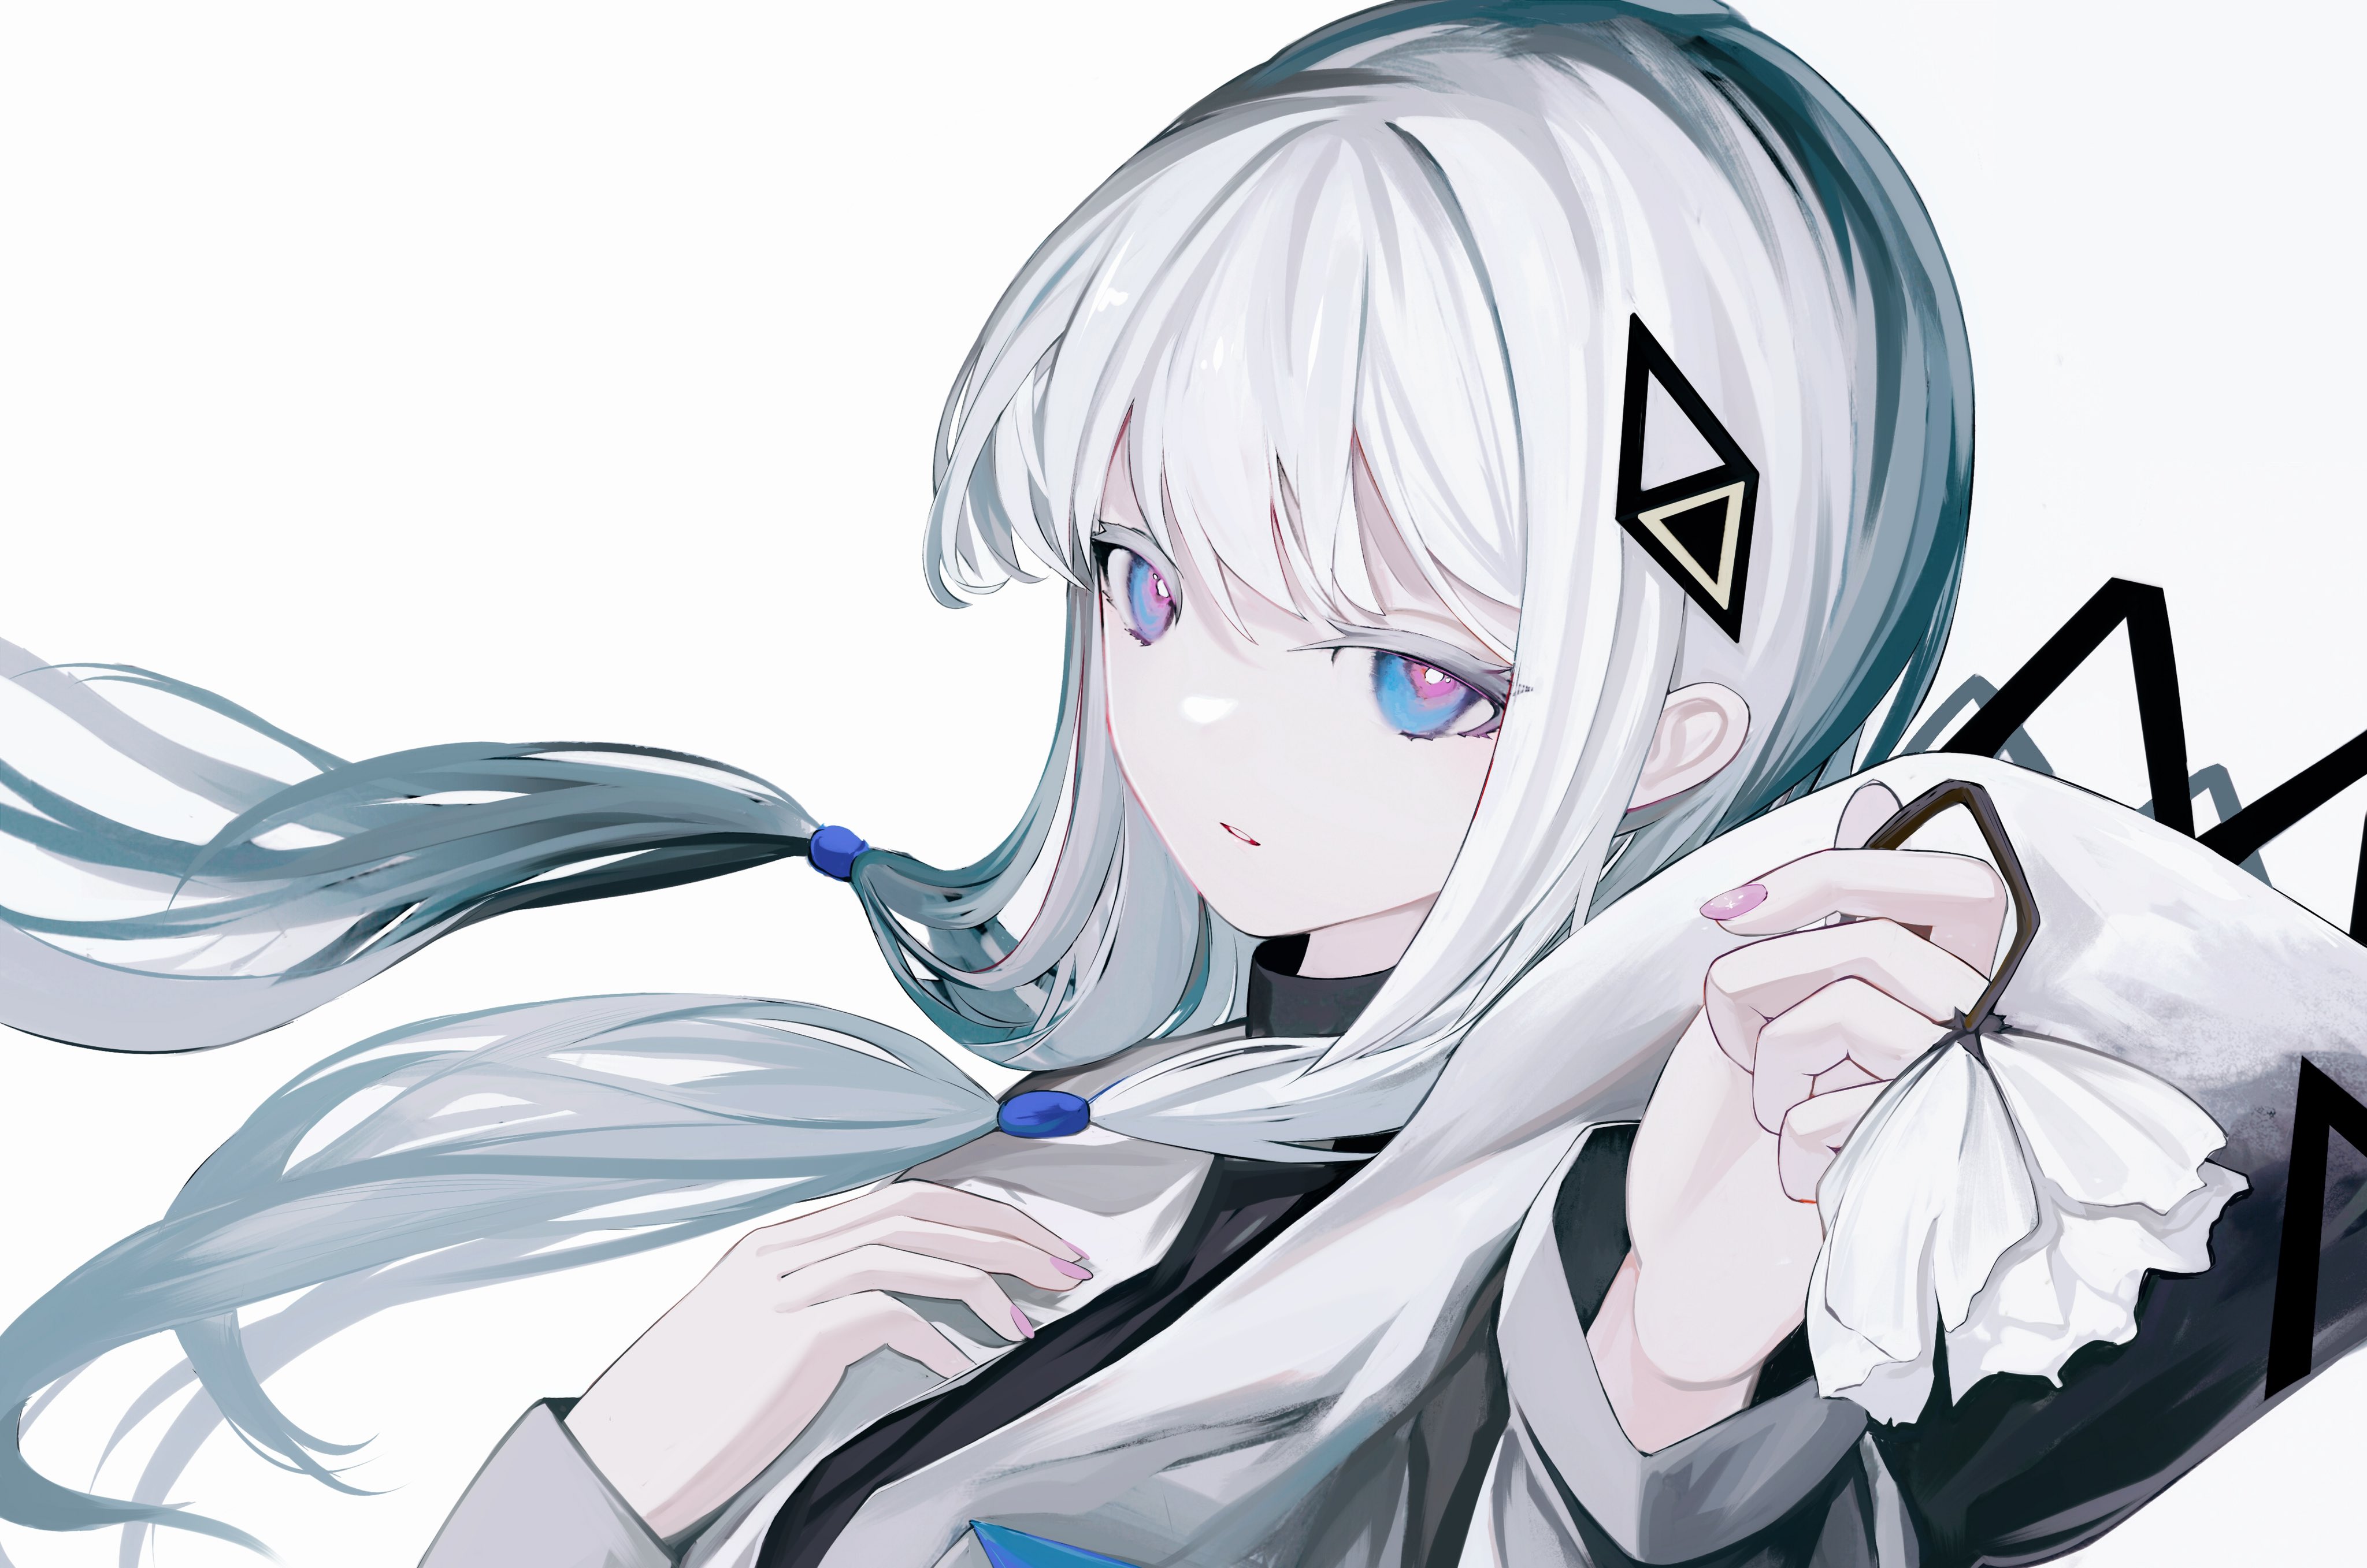 What are some of the best animes with white-haired main characters? - Quora